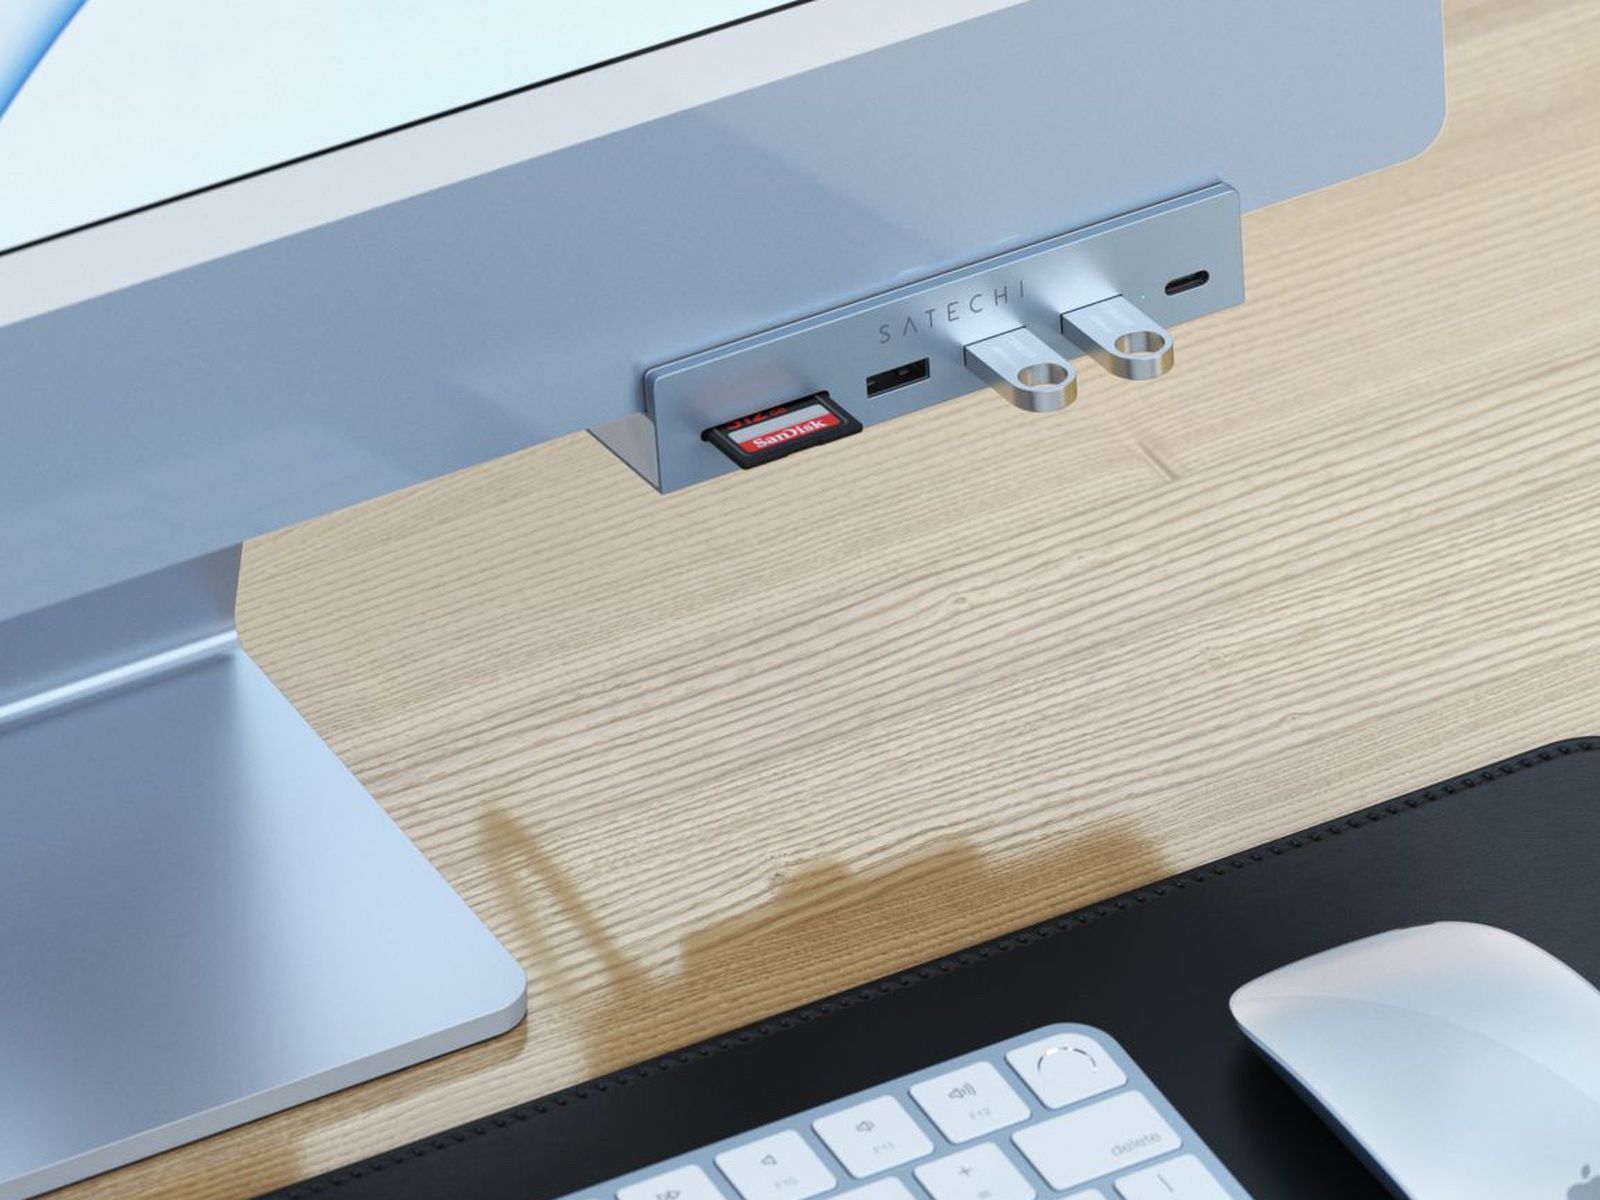 Bedre Udover Medicin Satechi Launches New USB-C Clamp Hub for M1 iMac - MacRumors